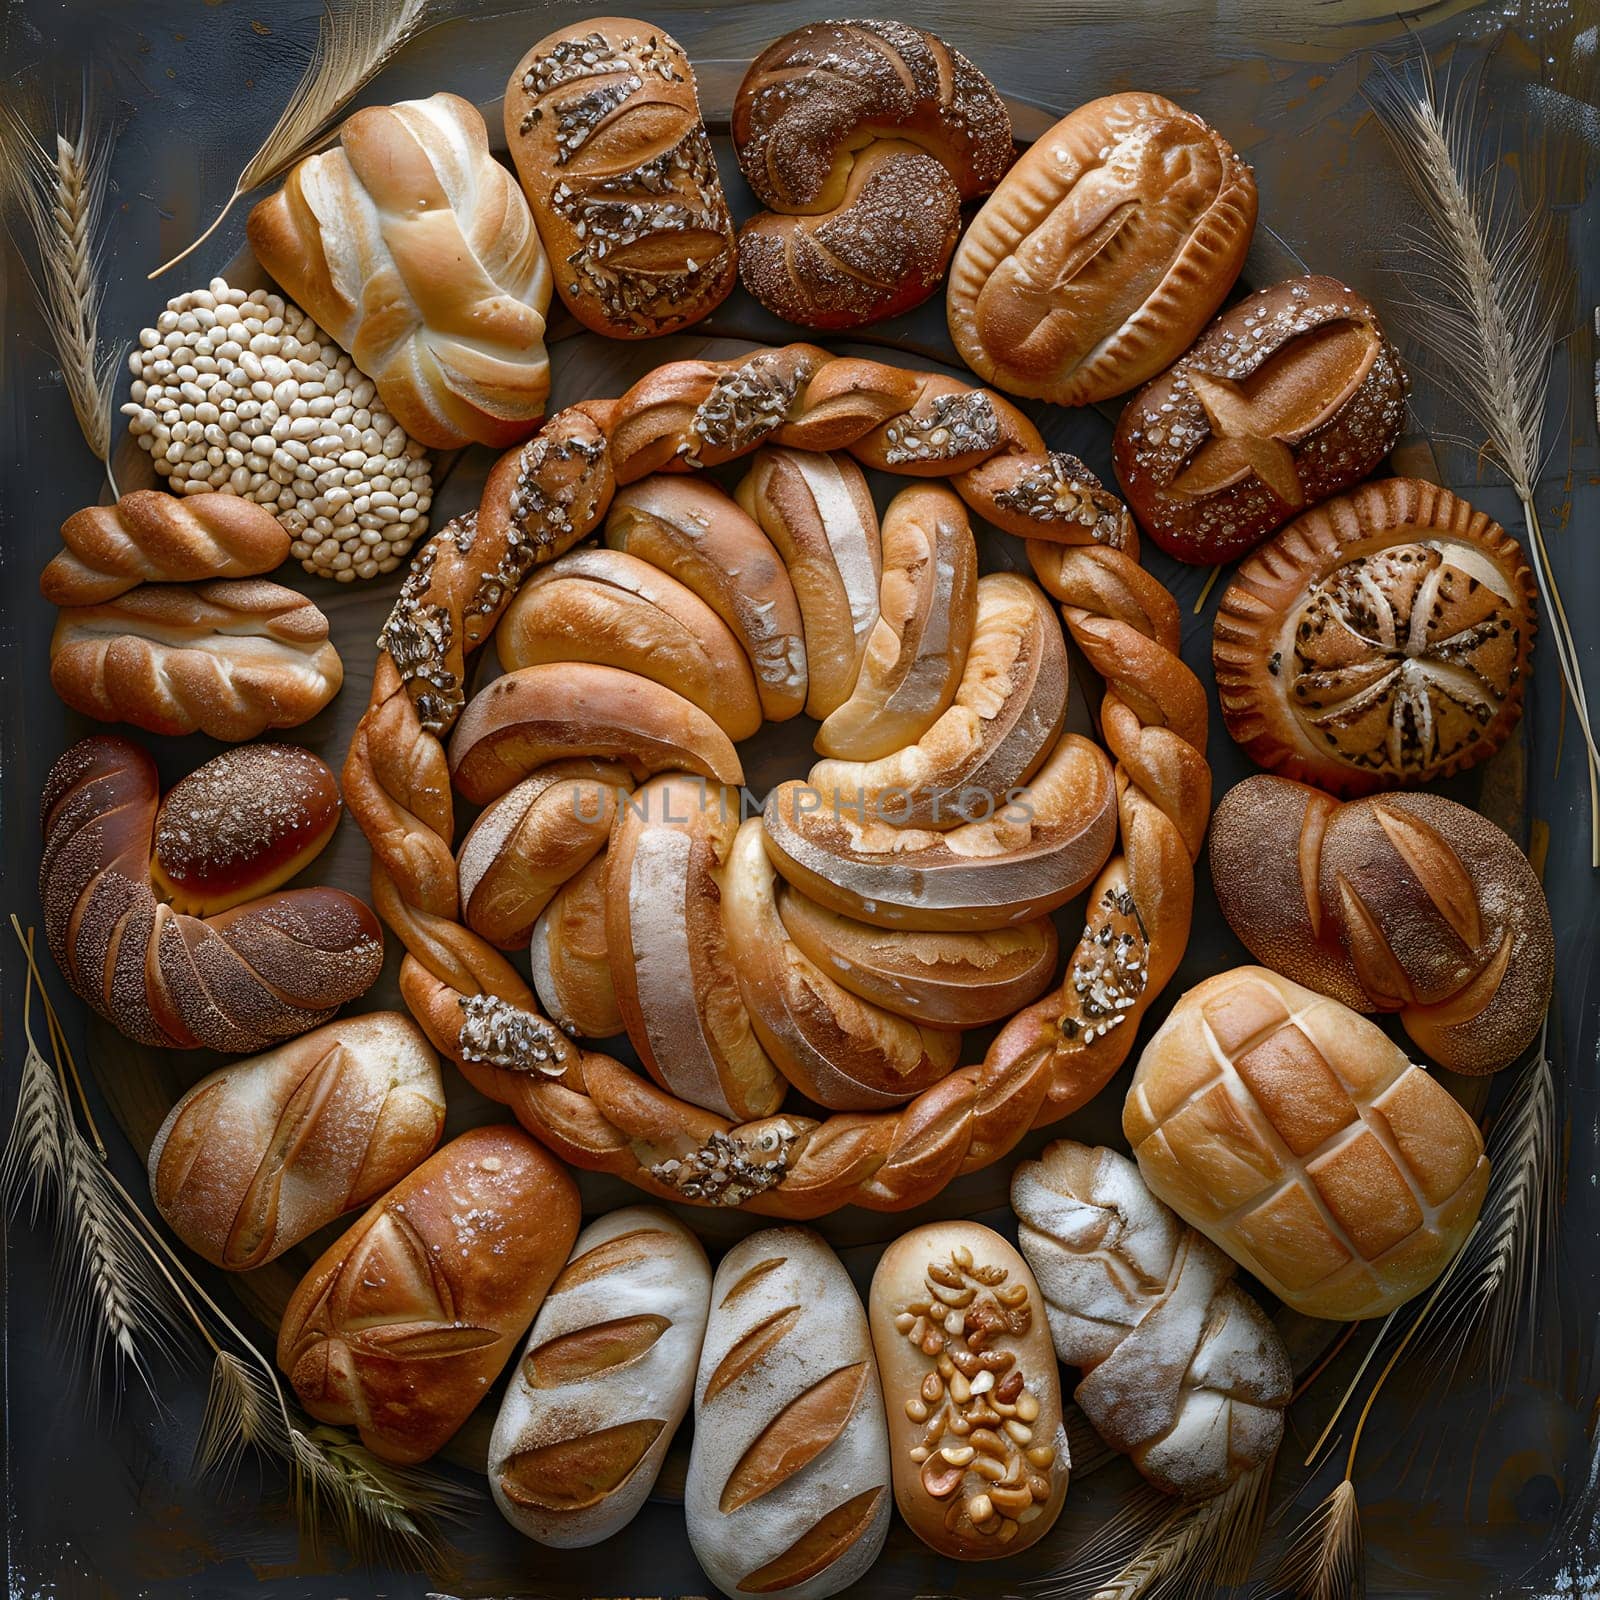 A variety of baked goods are displayed in a circular arrangement on a wooden table. The breads showcase different ingredients and textures, representing staple foods in various cuisines